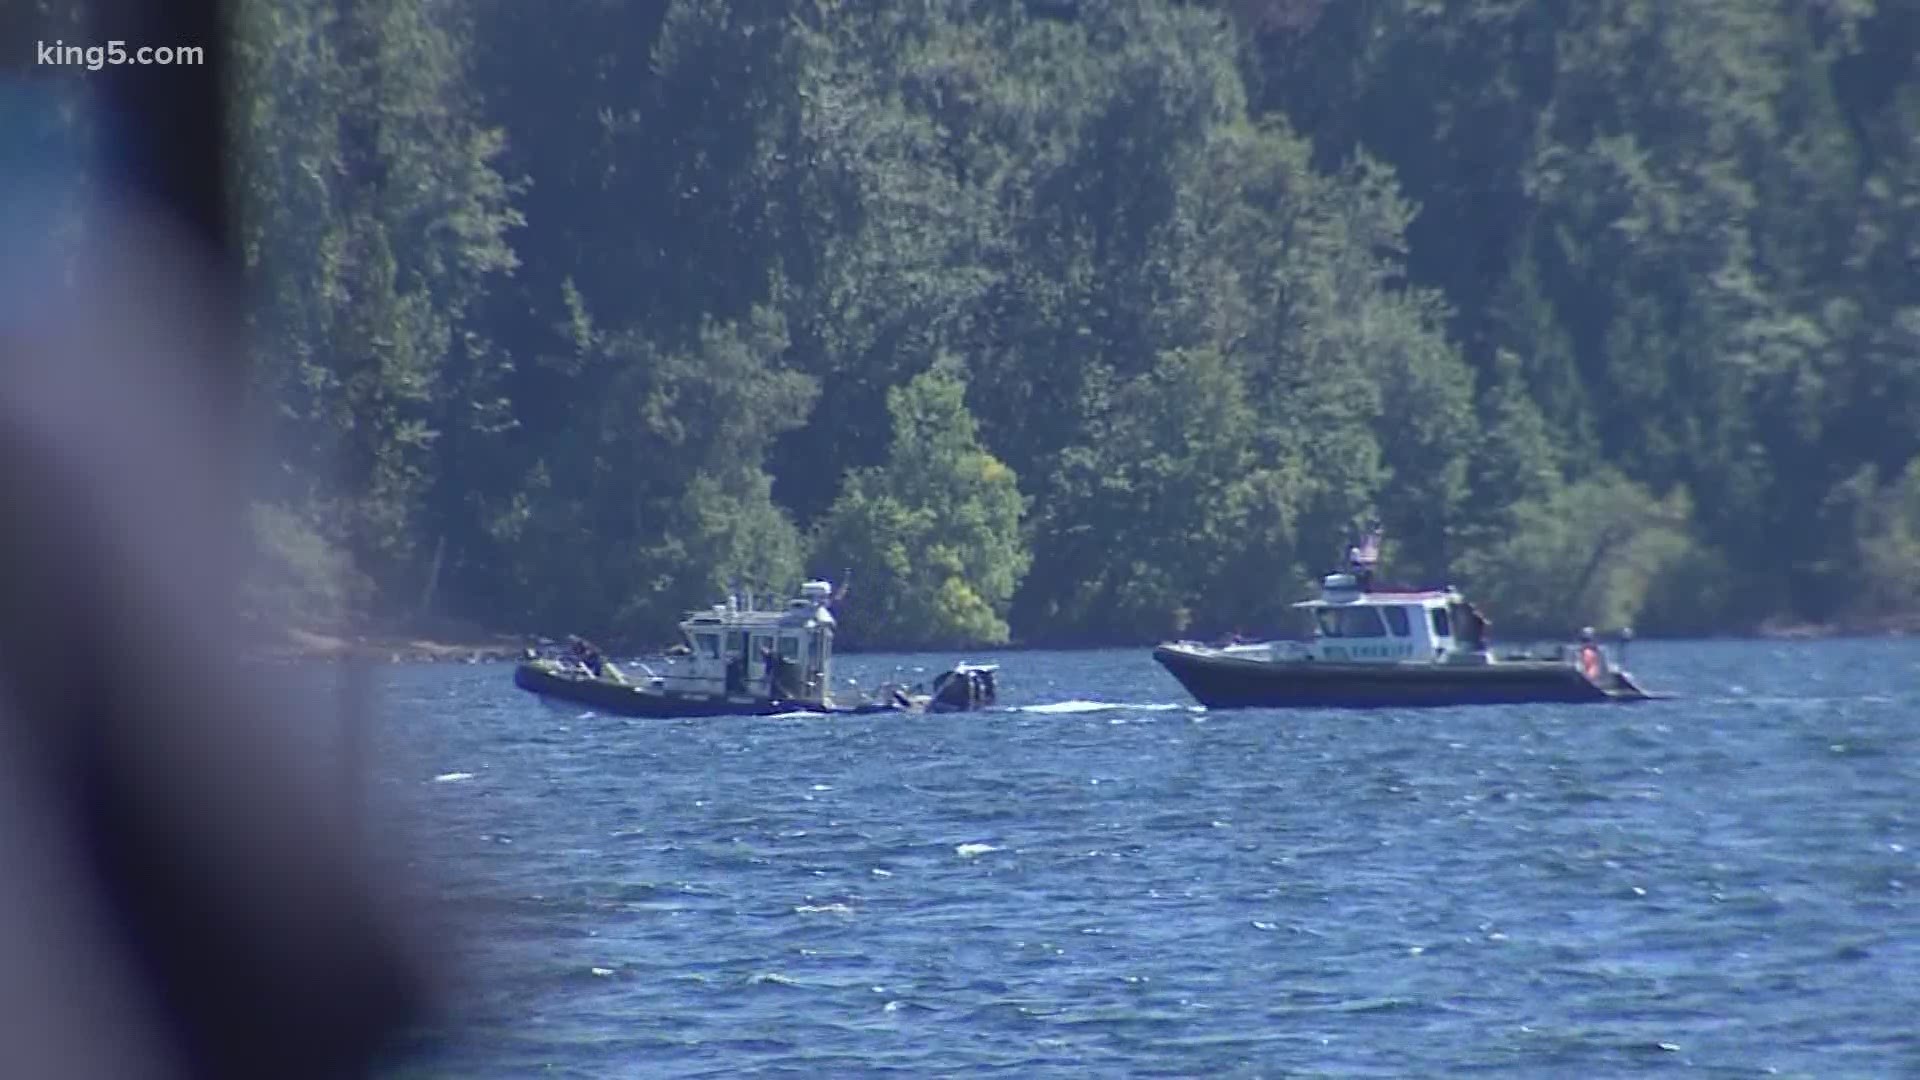 Seattle Fire received a 911 call about a man who jumped off a boat to go swimming and did not resurface.